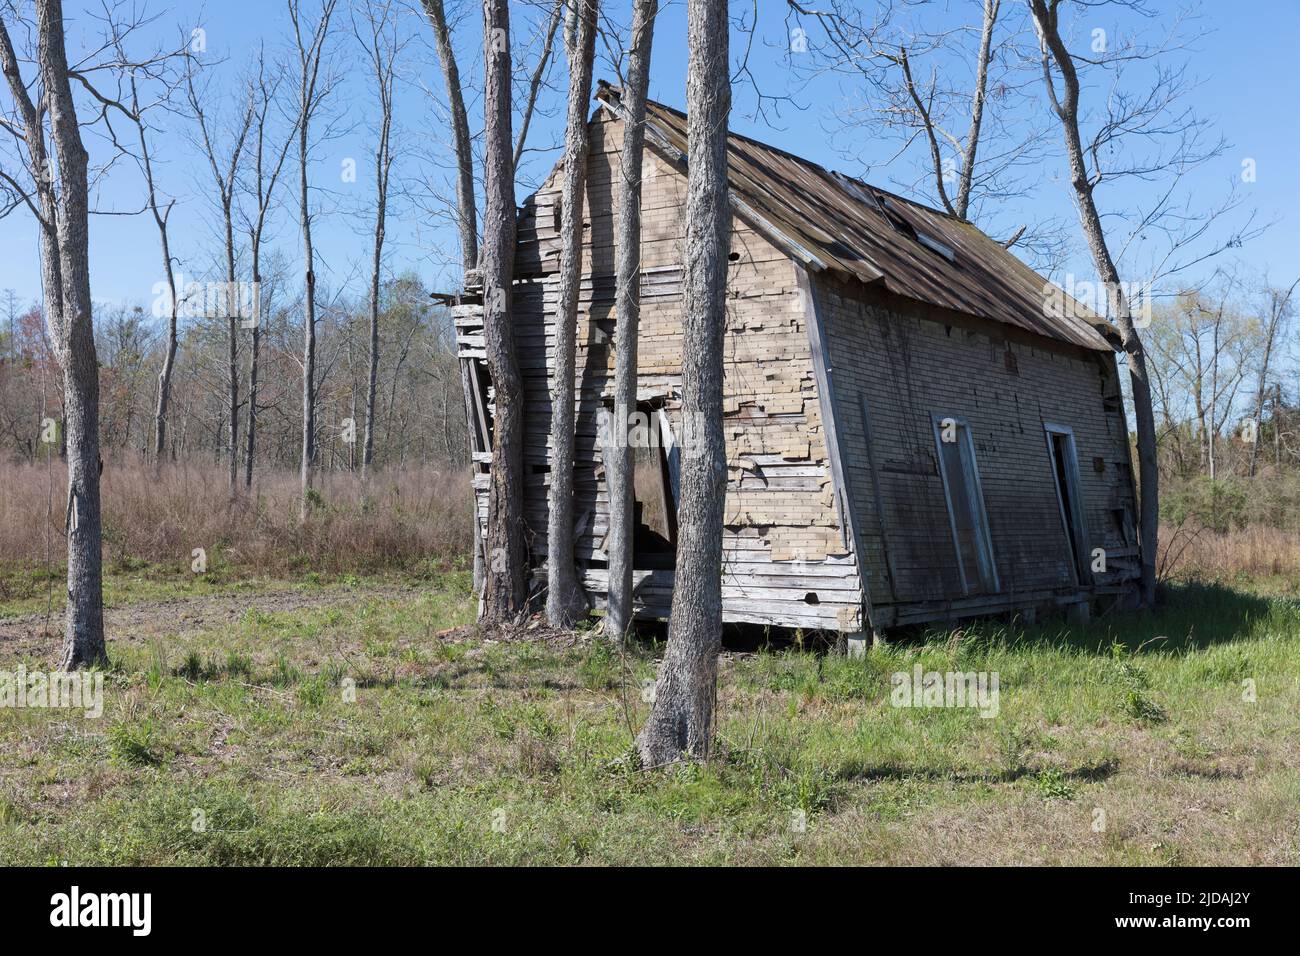 Abandoned homestead, a small log cabin, a building leaning to the side. Stock Photo